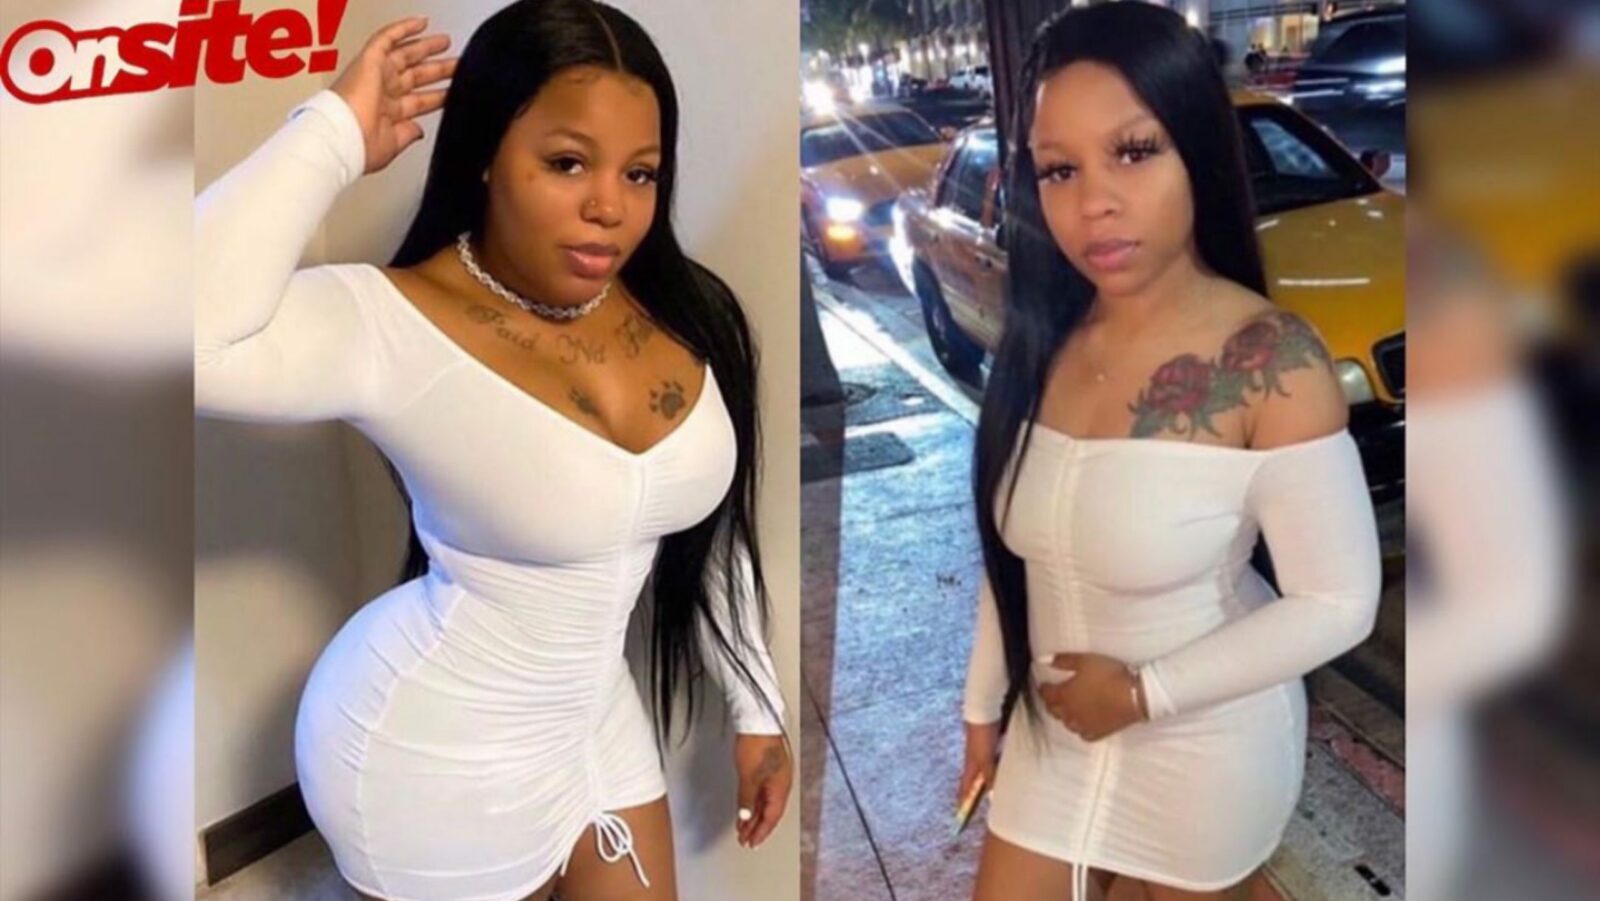  Juiccy Baby’s Sister Throws Shade and Implies MoneyBaggYo Is Still Involved With Whitney White